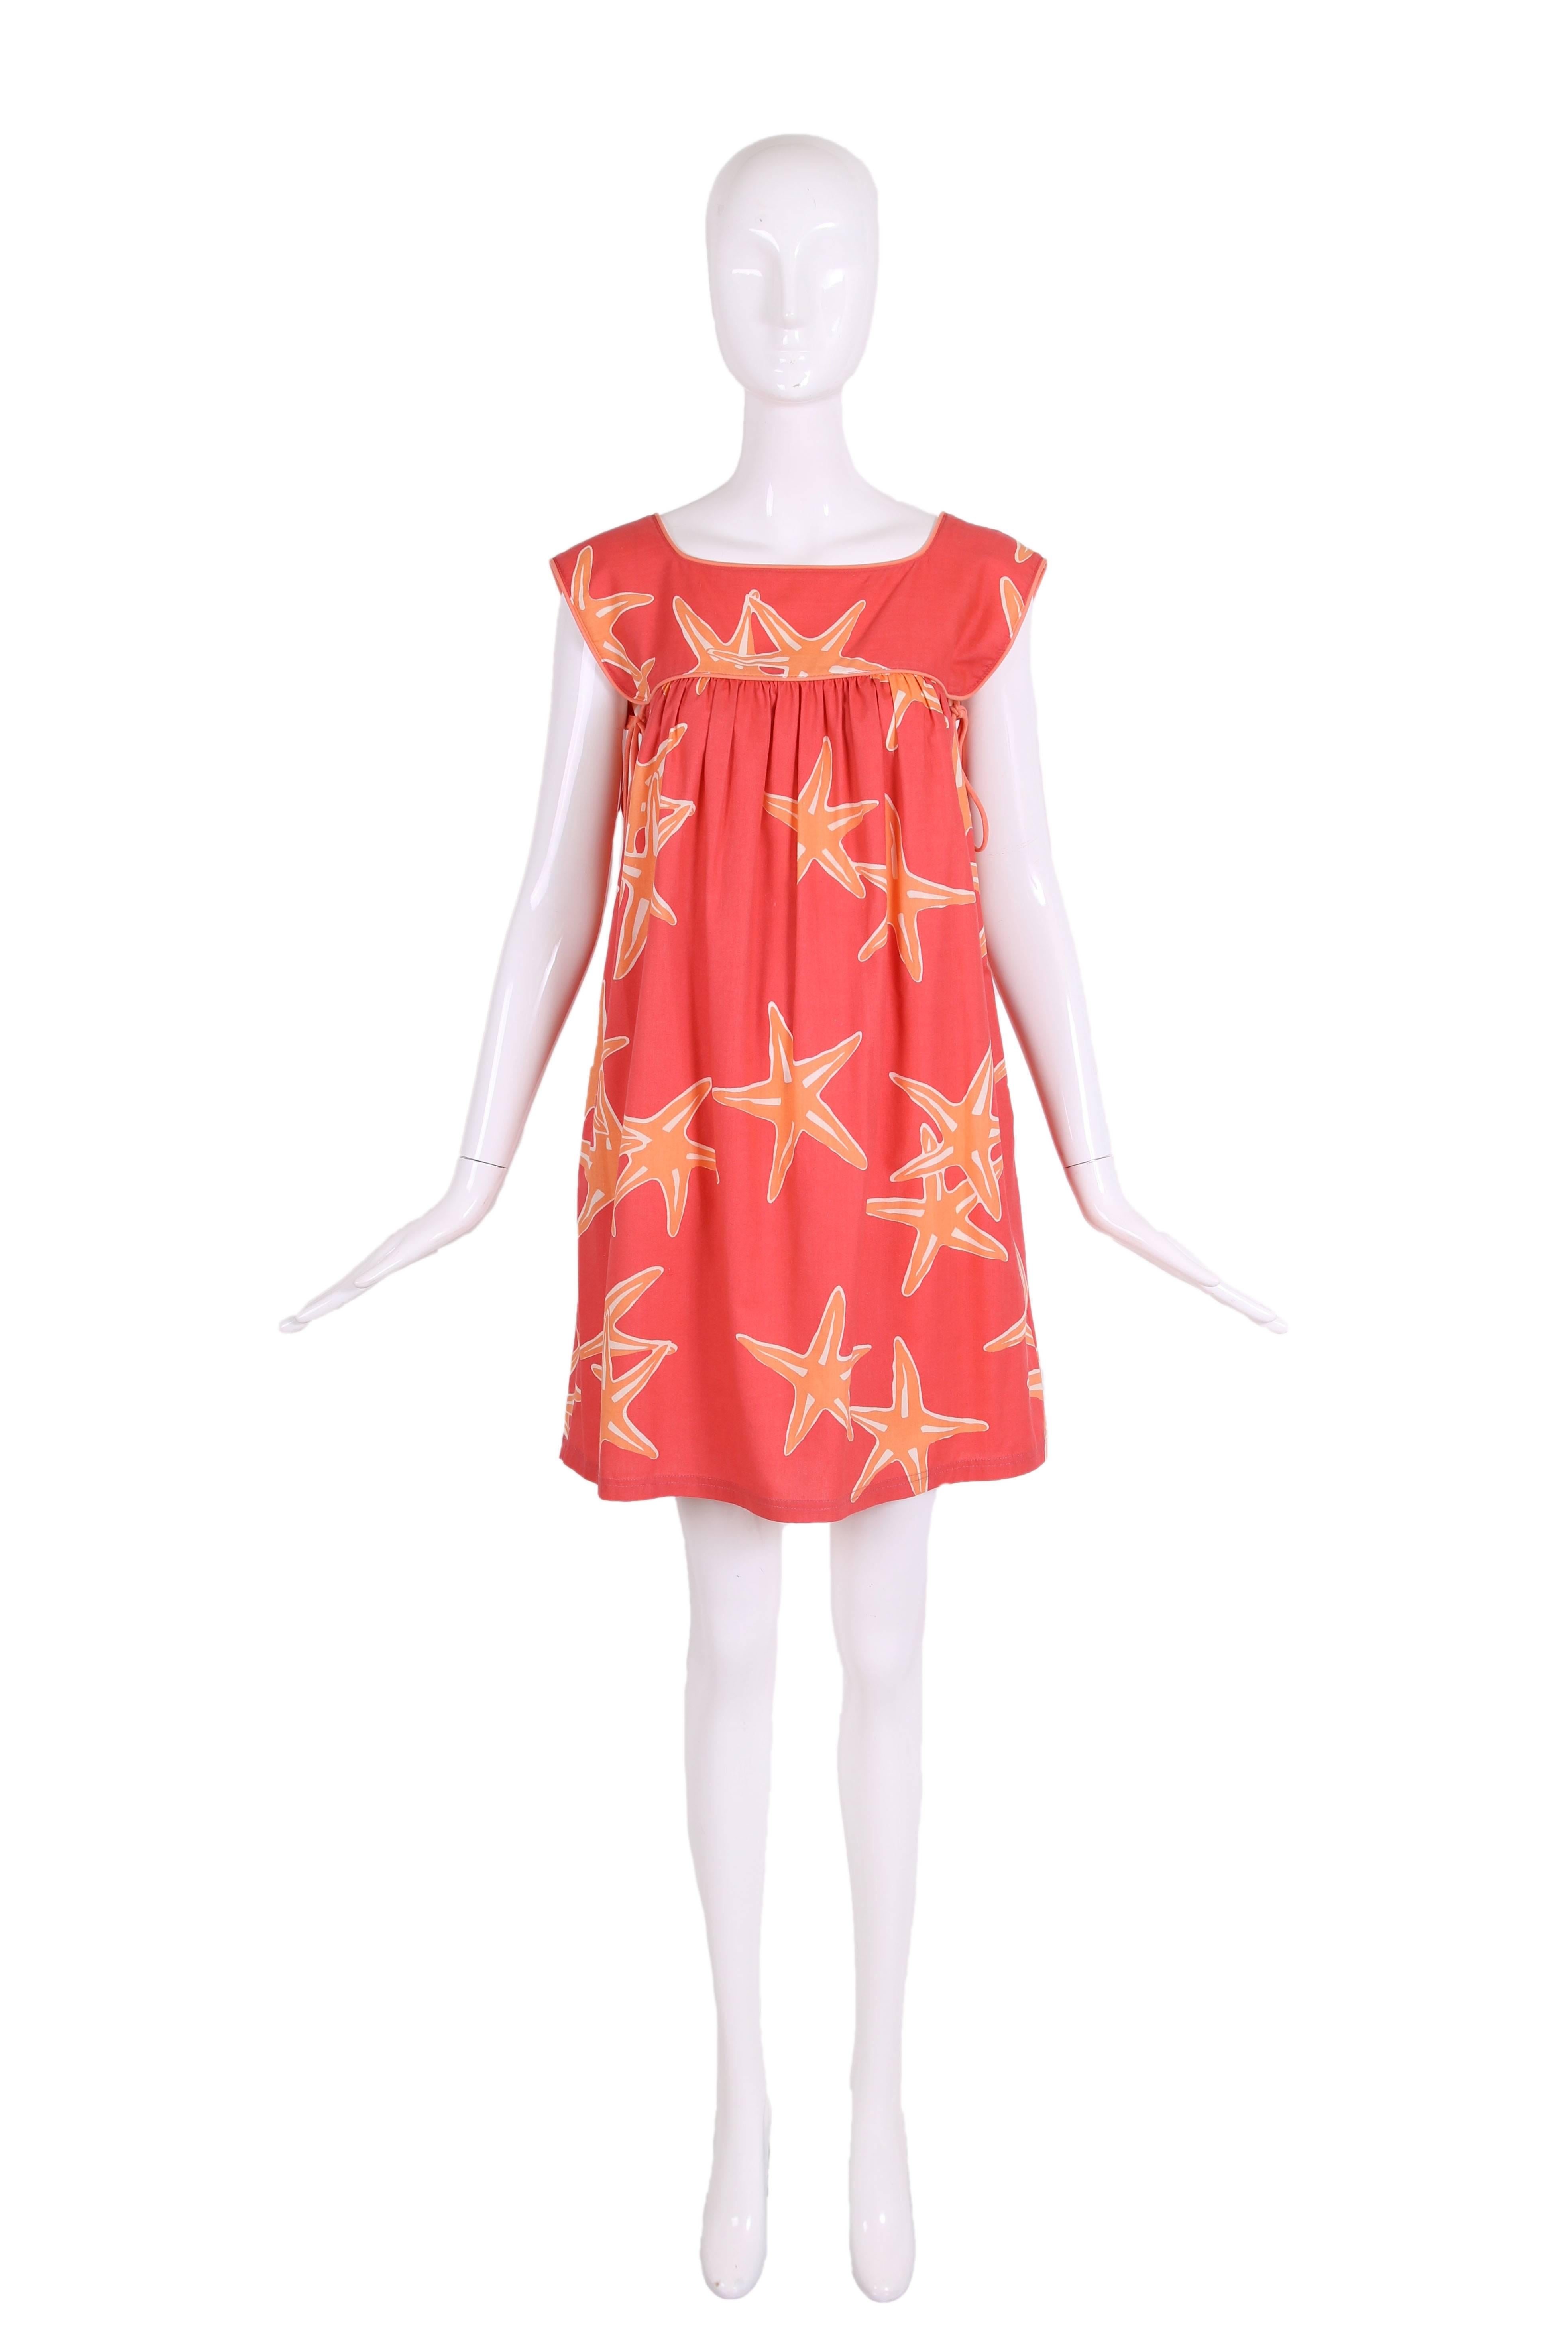 Vintage Bill Tice sleeveless babydoll cotton sundress in coral, orange, and white starfish print. This dress features coral-colored string ties at each under arm and two side pockets. In excellent condition. No size tag, please consult measurements.